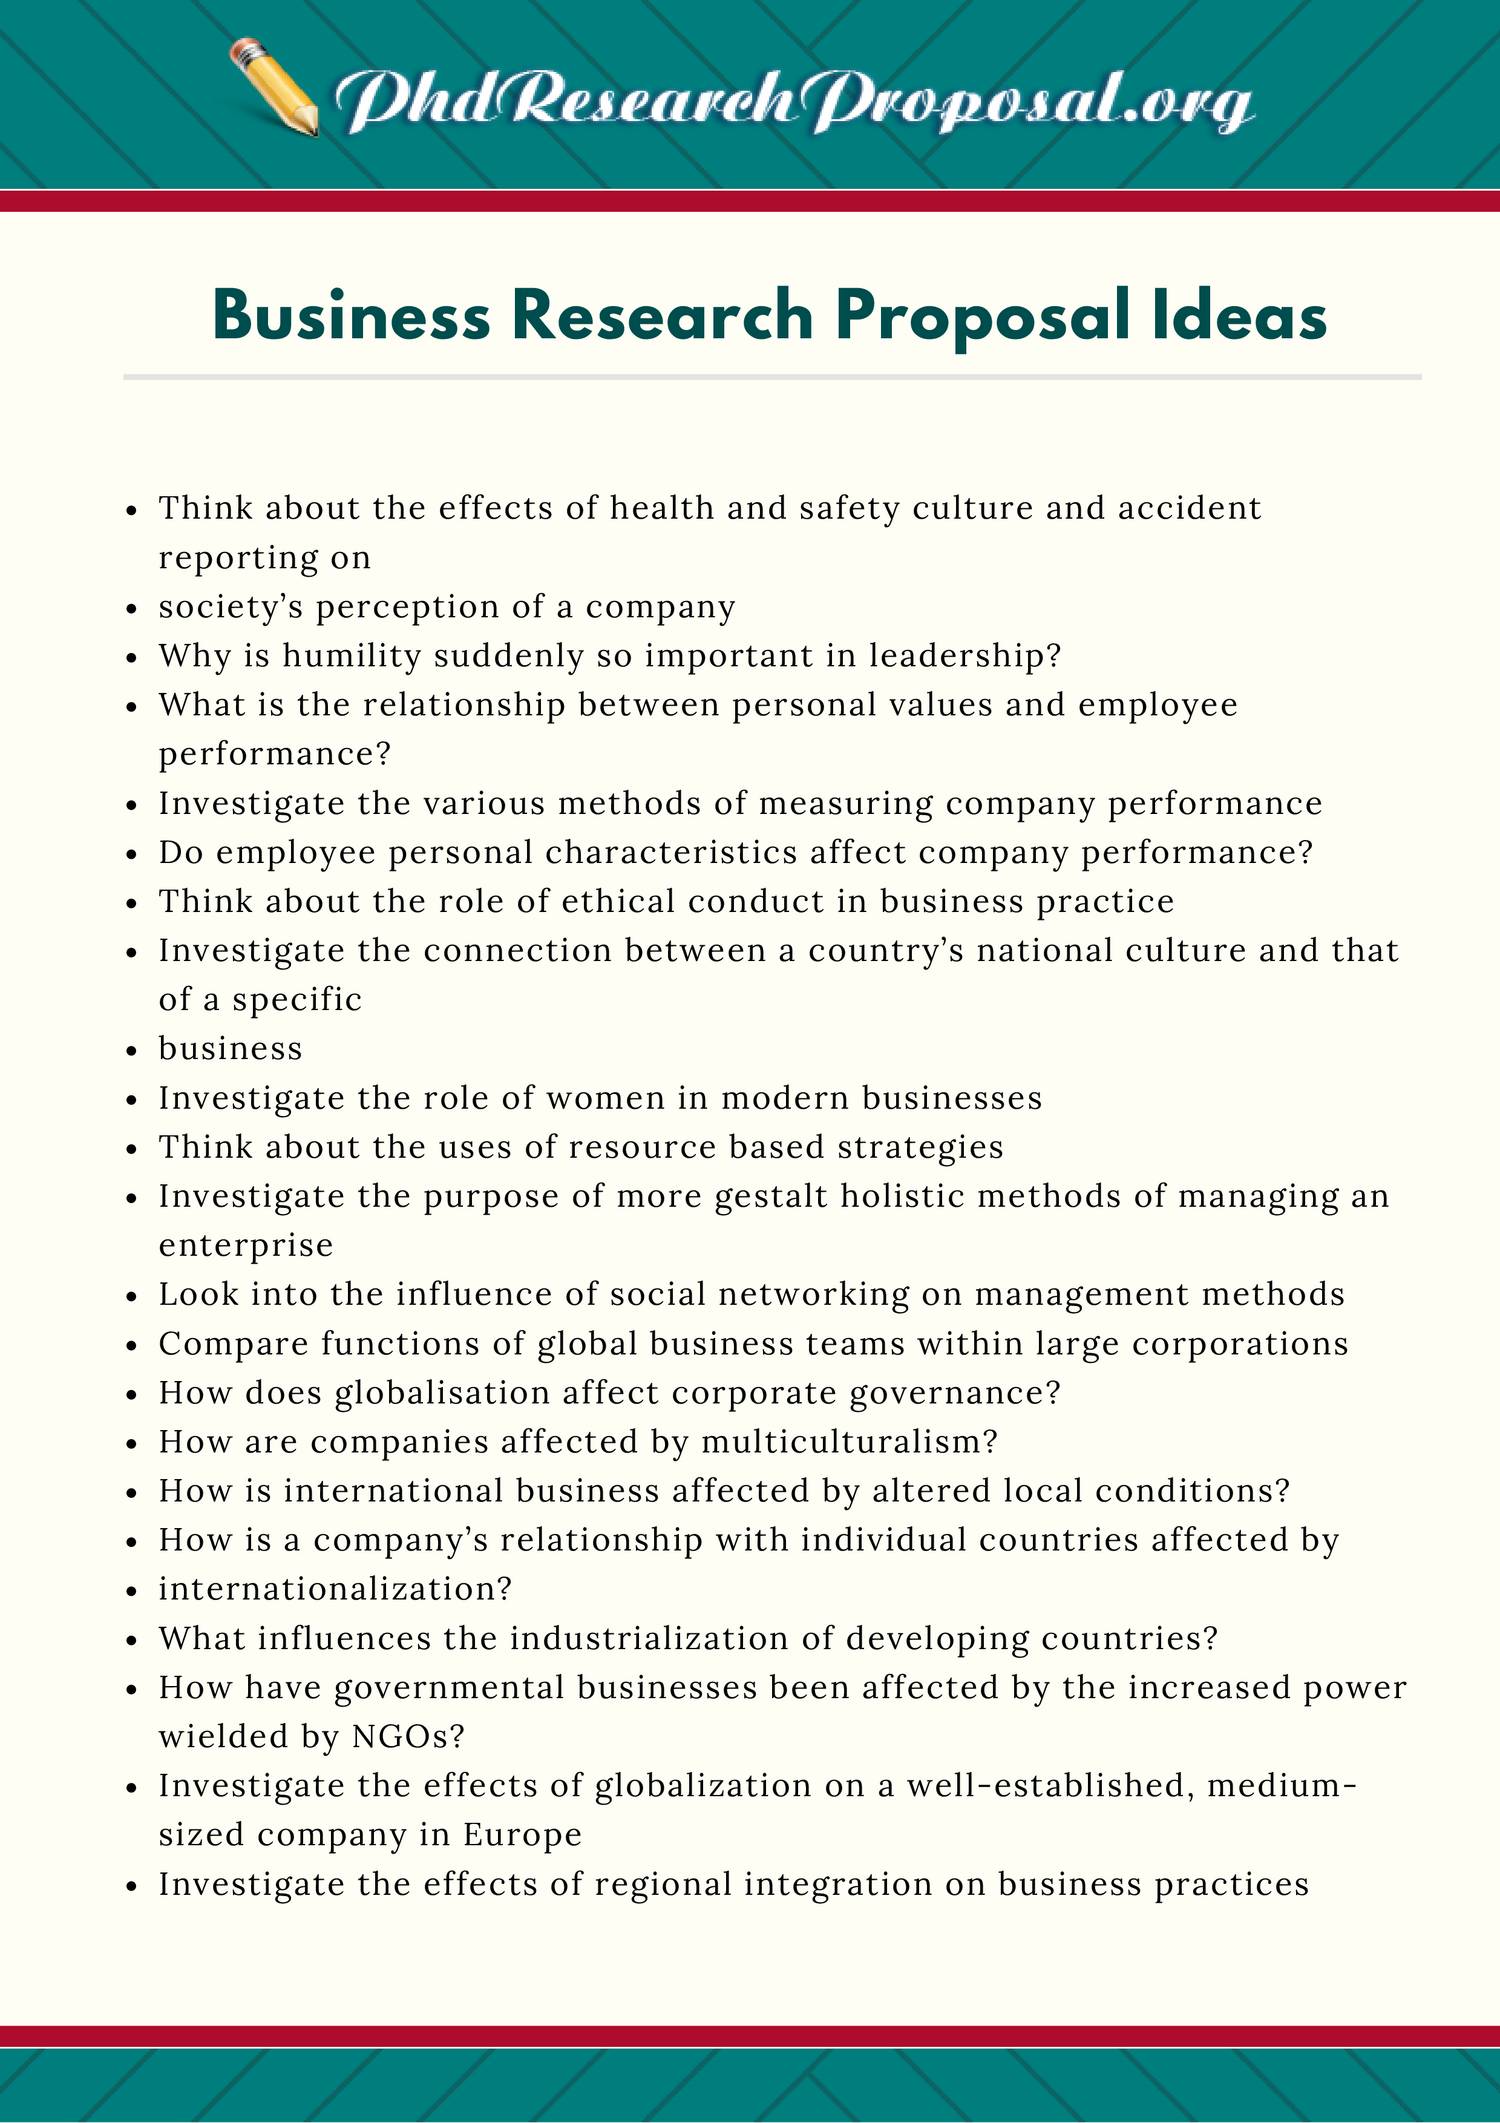 e business research proposal